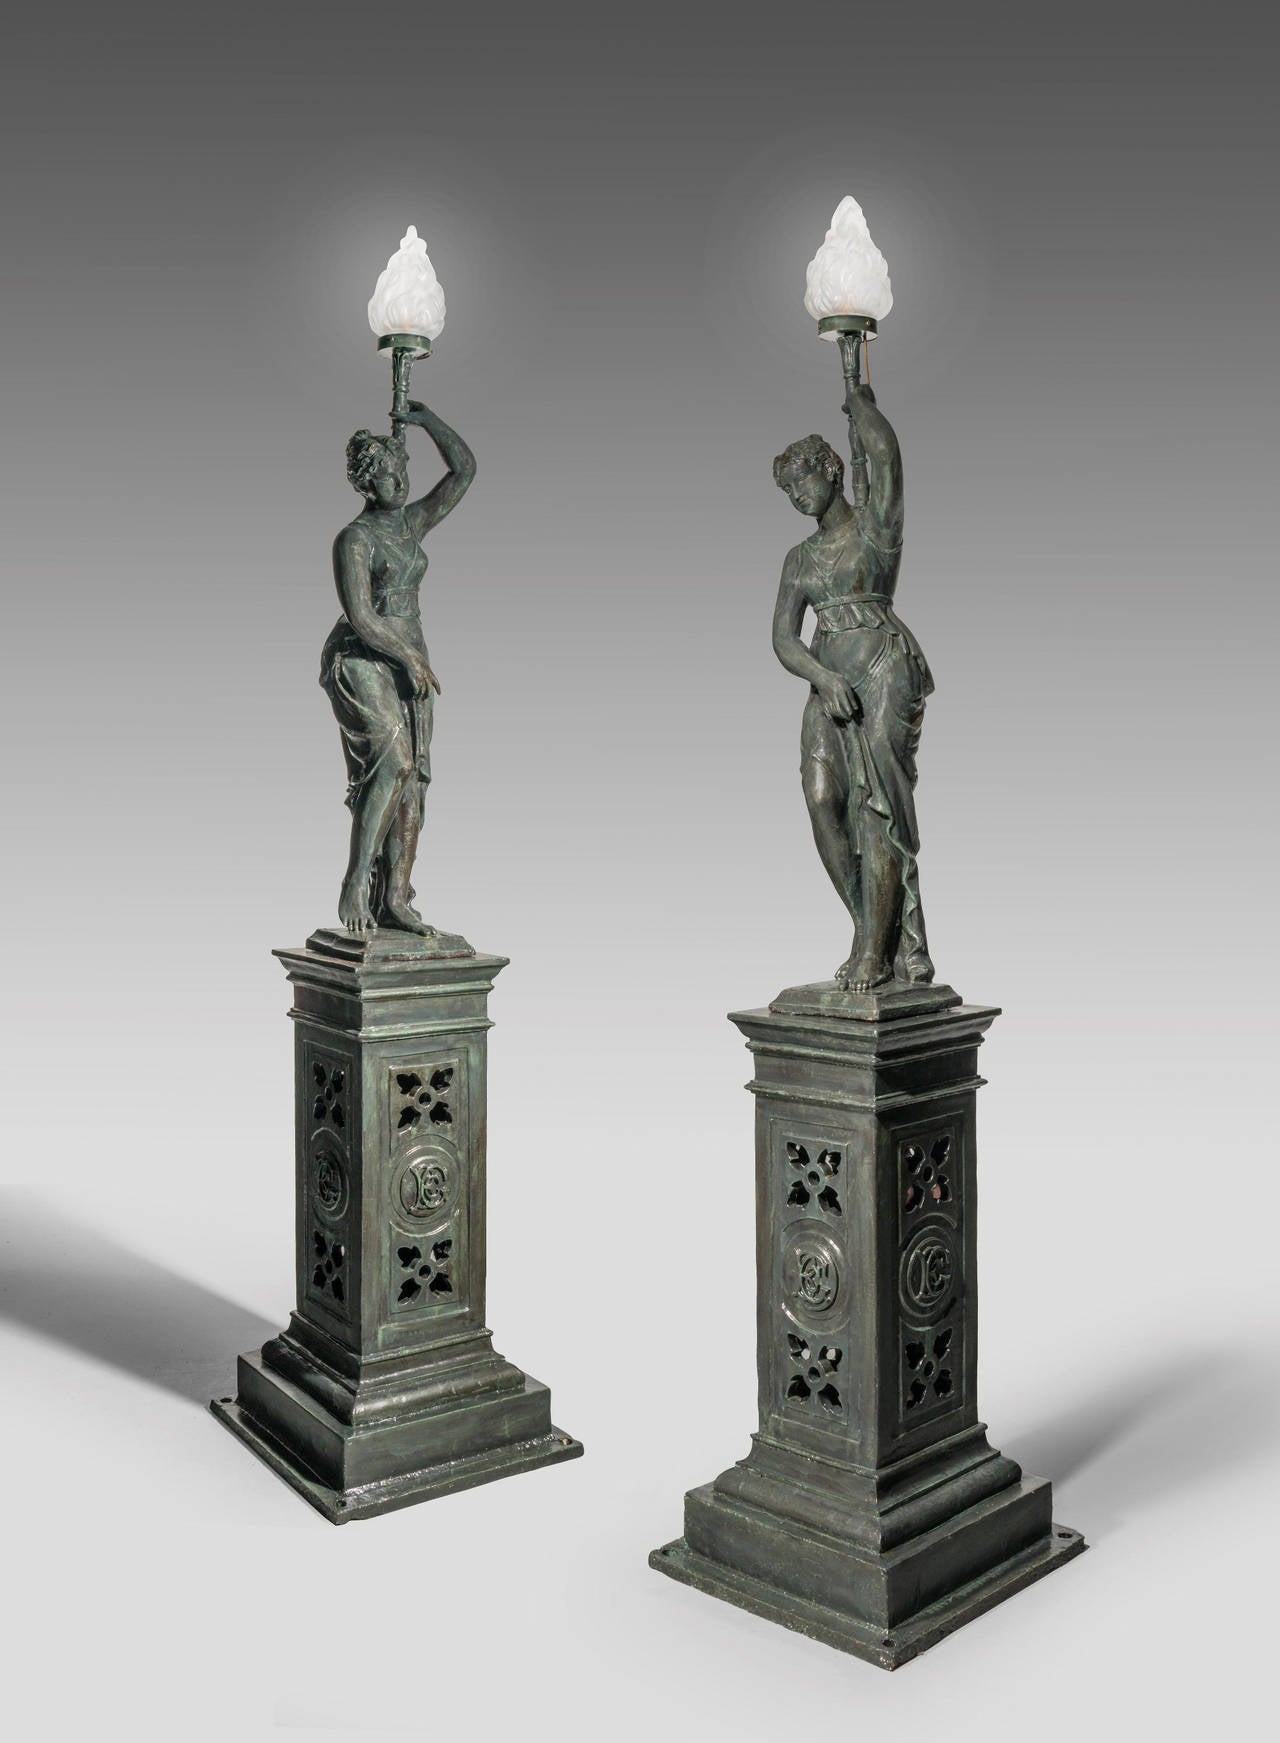 A most impressive pair of bronzed figures of young ladies, with a dark rich patina. Please note these figures weight approximately 300-400 kilos each.

